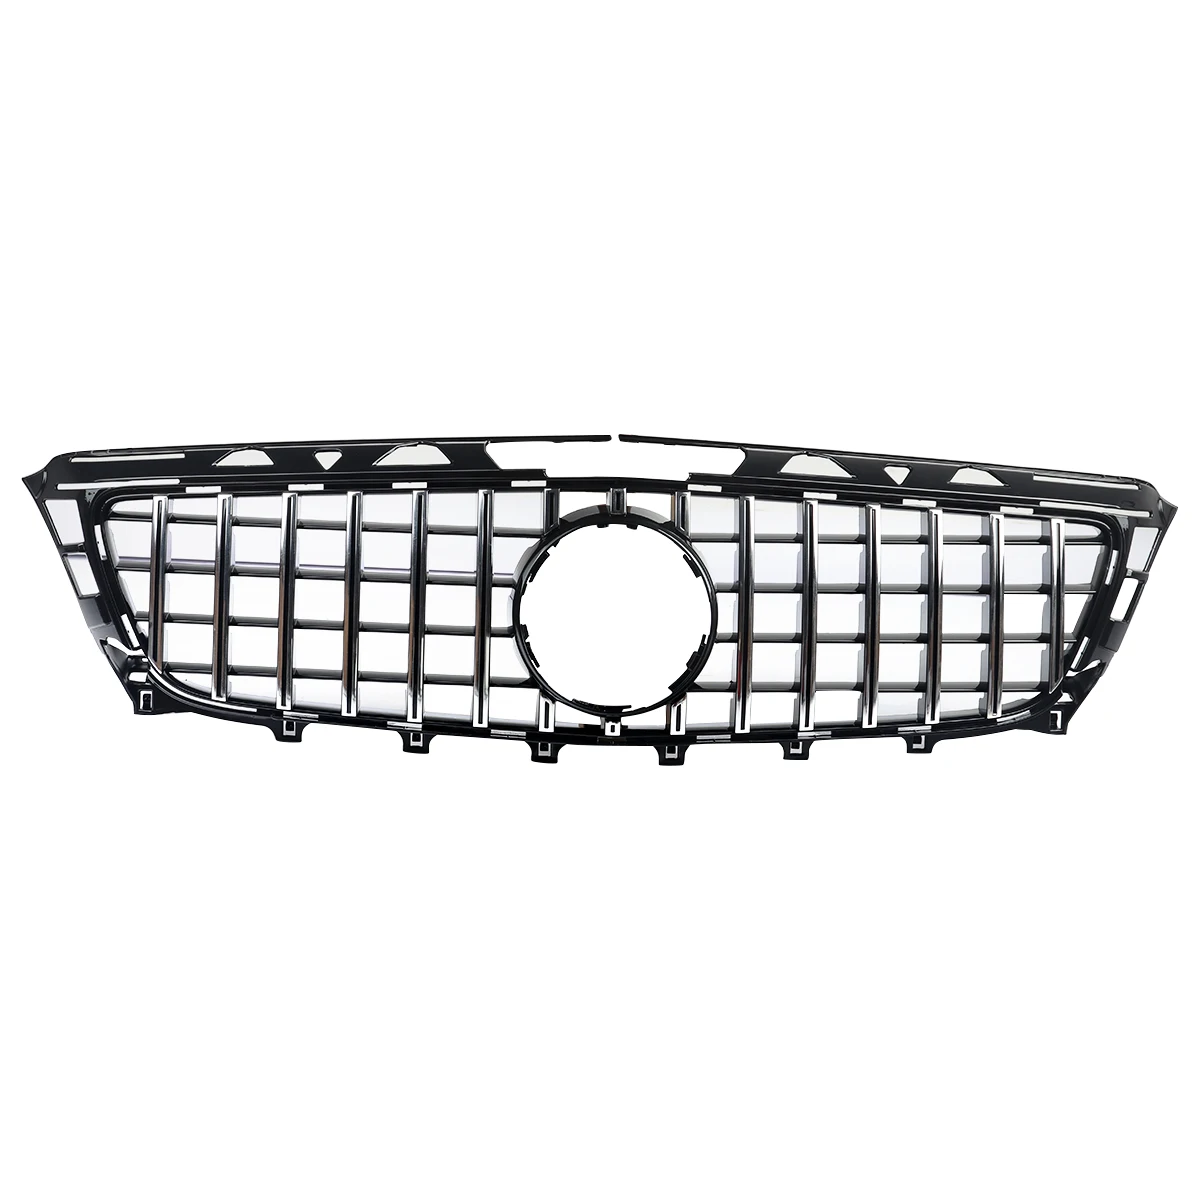 

MagicKit FOR MERCEDES GLC X253 C253 SPORT GLC300 2020+ FRONT GRILLE PANAMERICANA GT STYLE